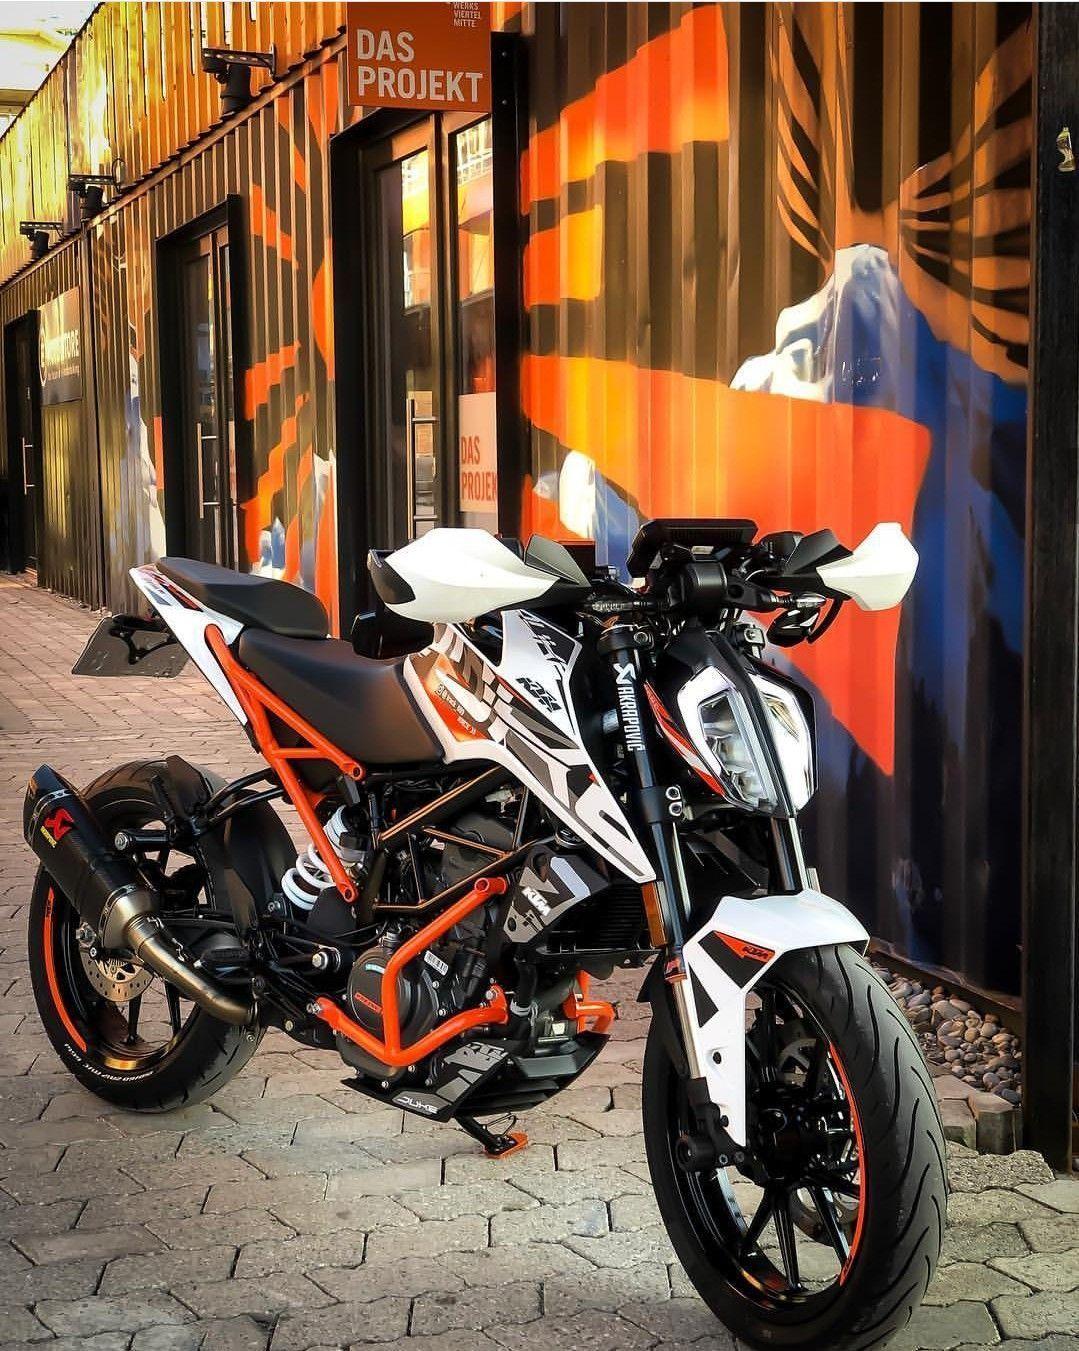 KTM Duke 200, RC390 motorcycle modification ideas from 